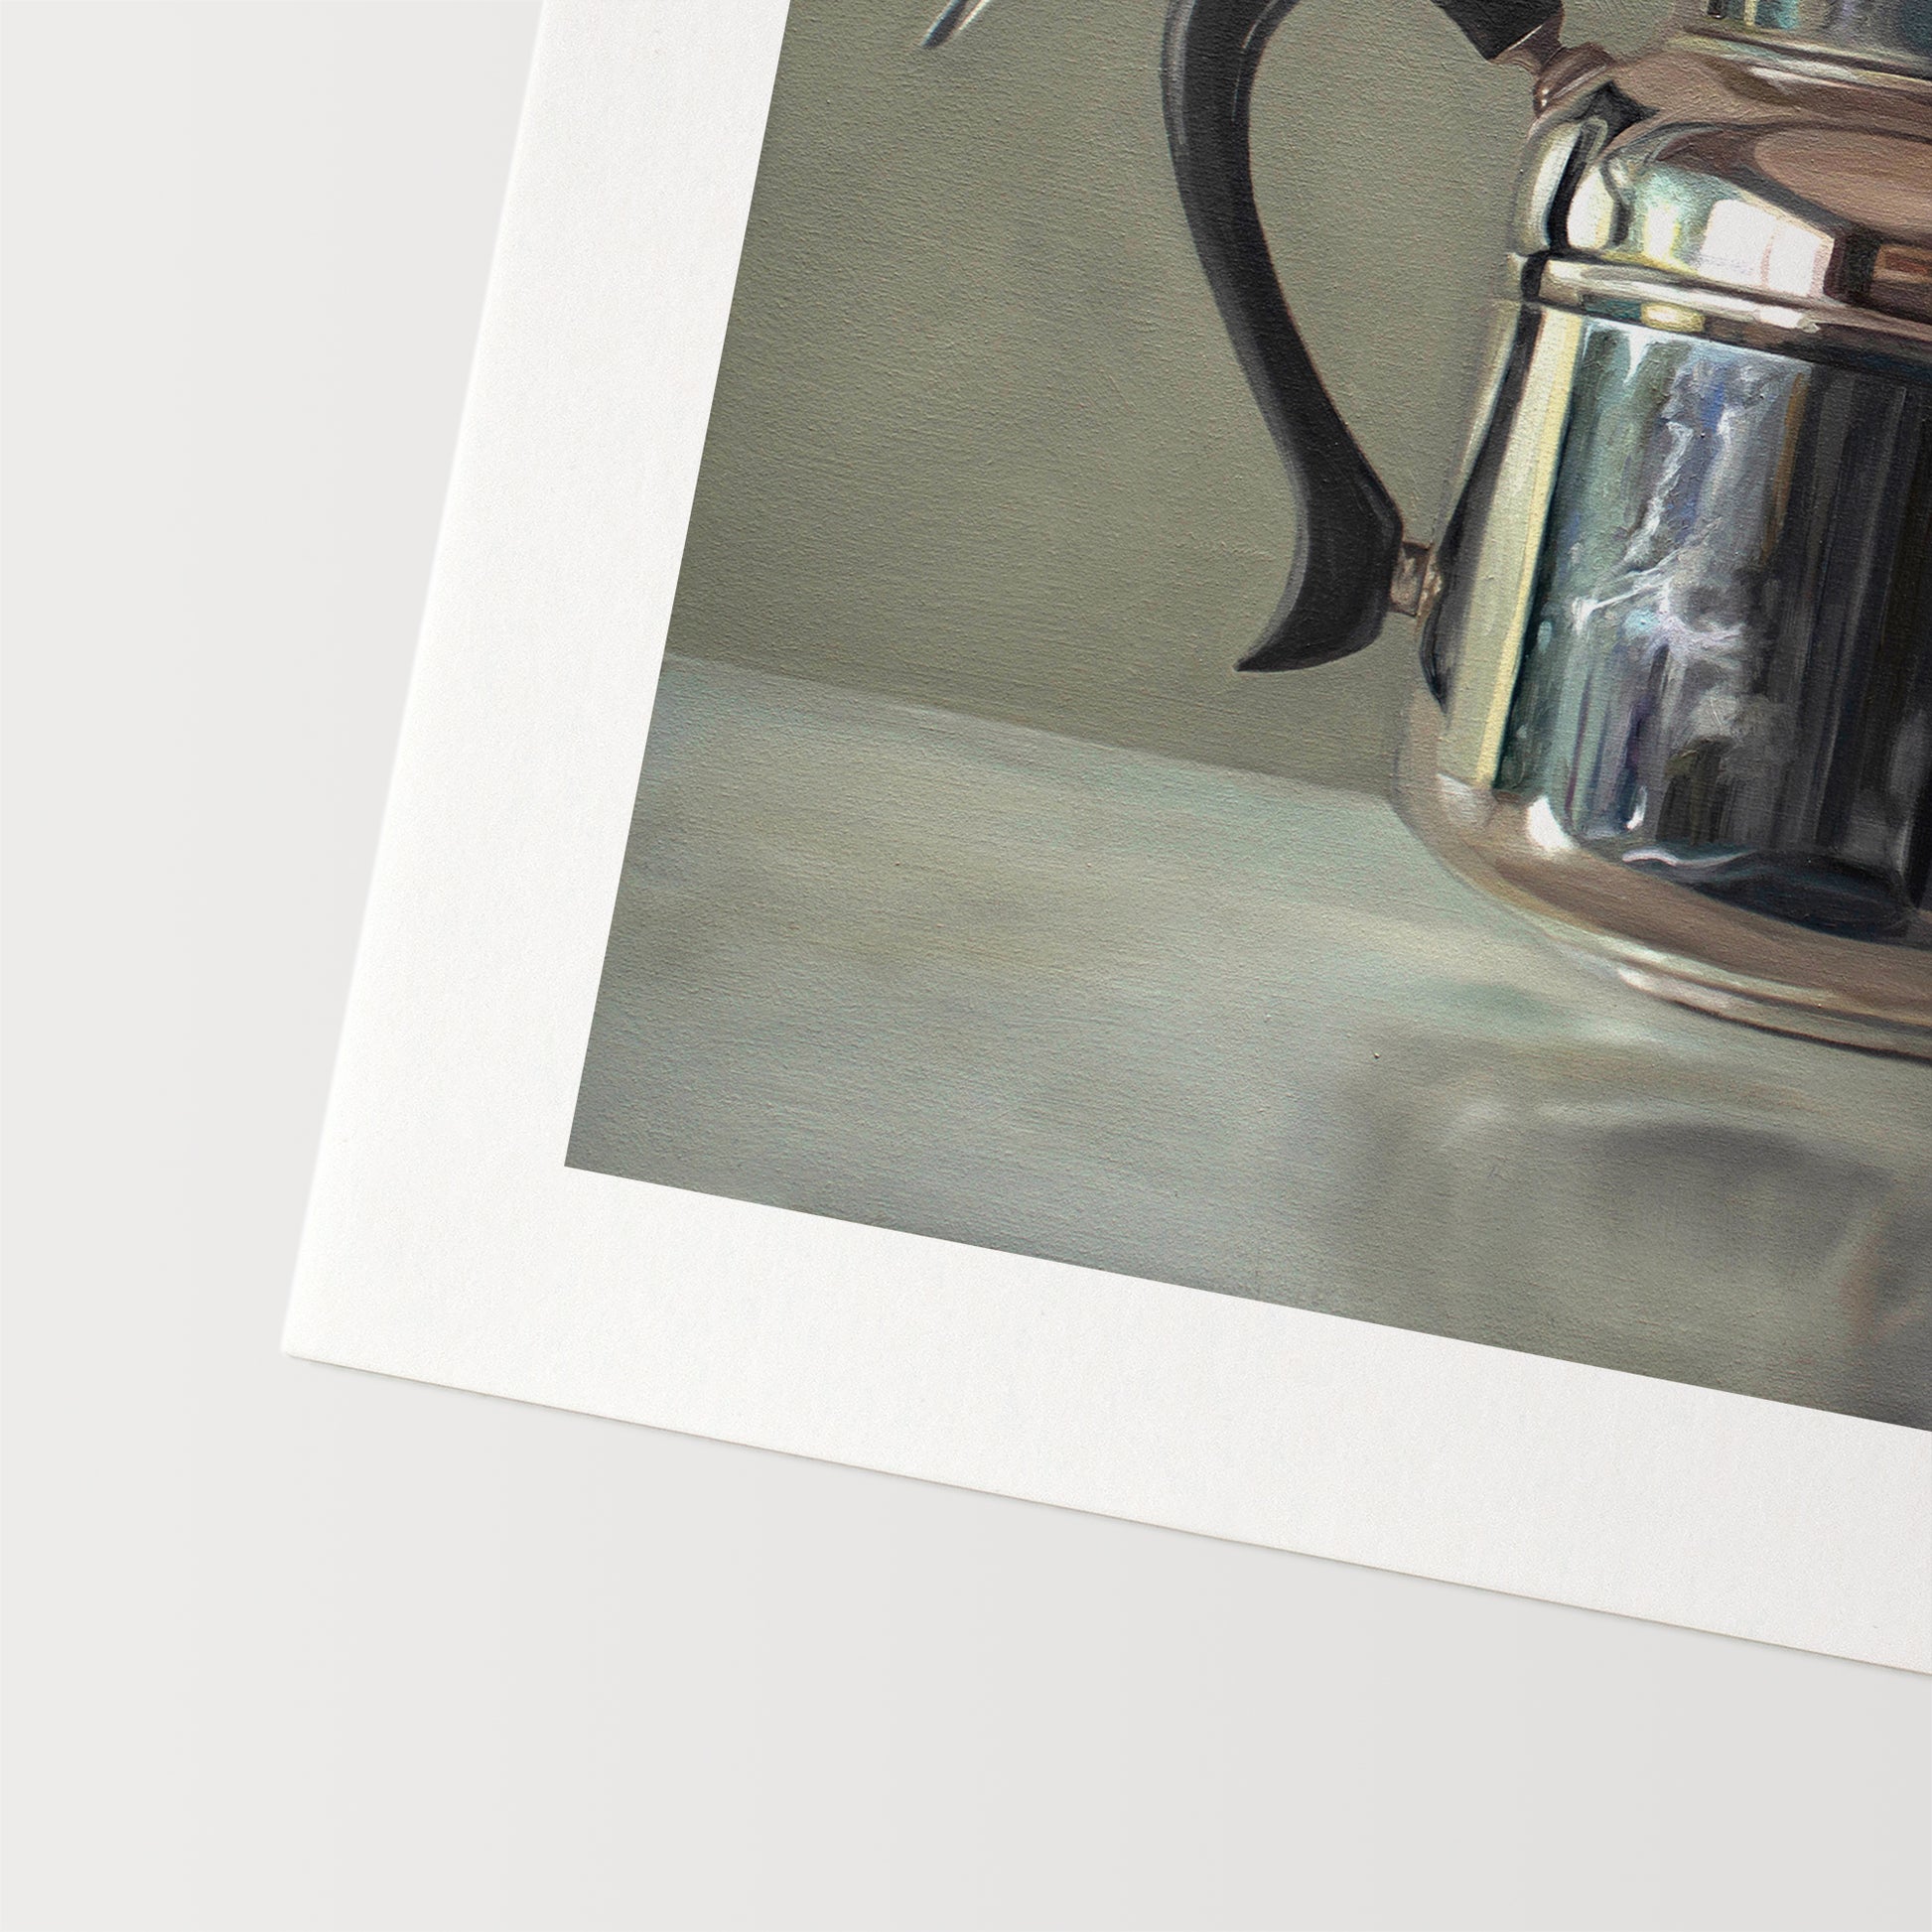 This artwork features a pair of chickadees inspecting a vintage tea kettle.This artwork is from a series featuring tea kettles paired with various objects.